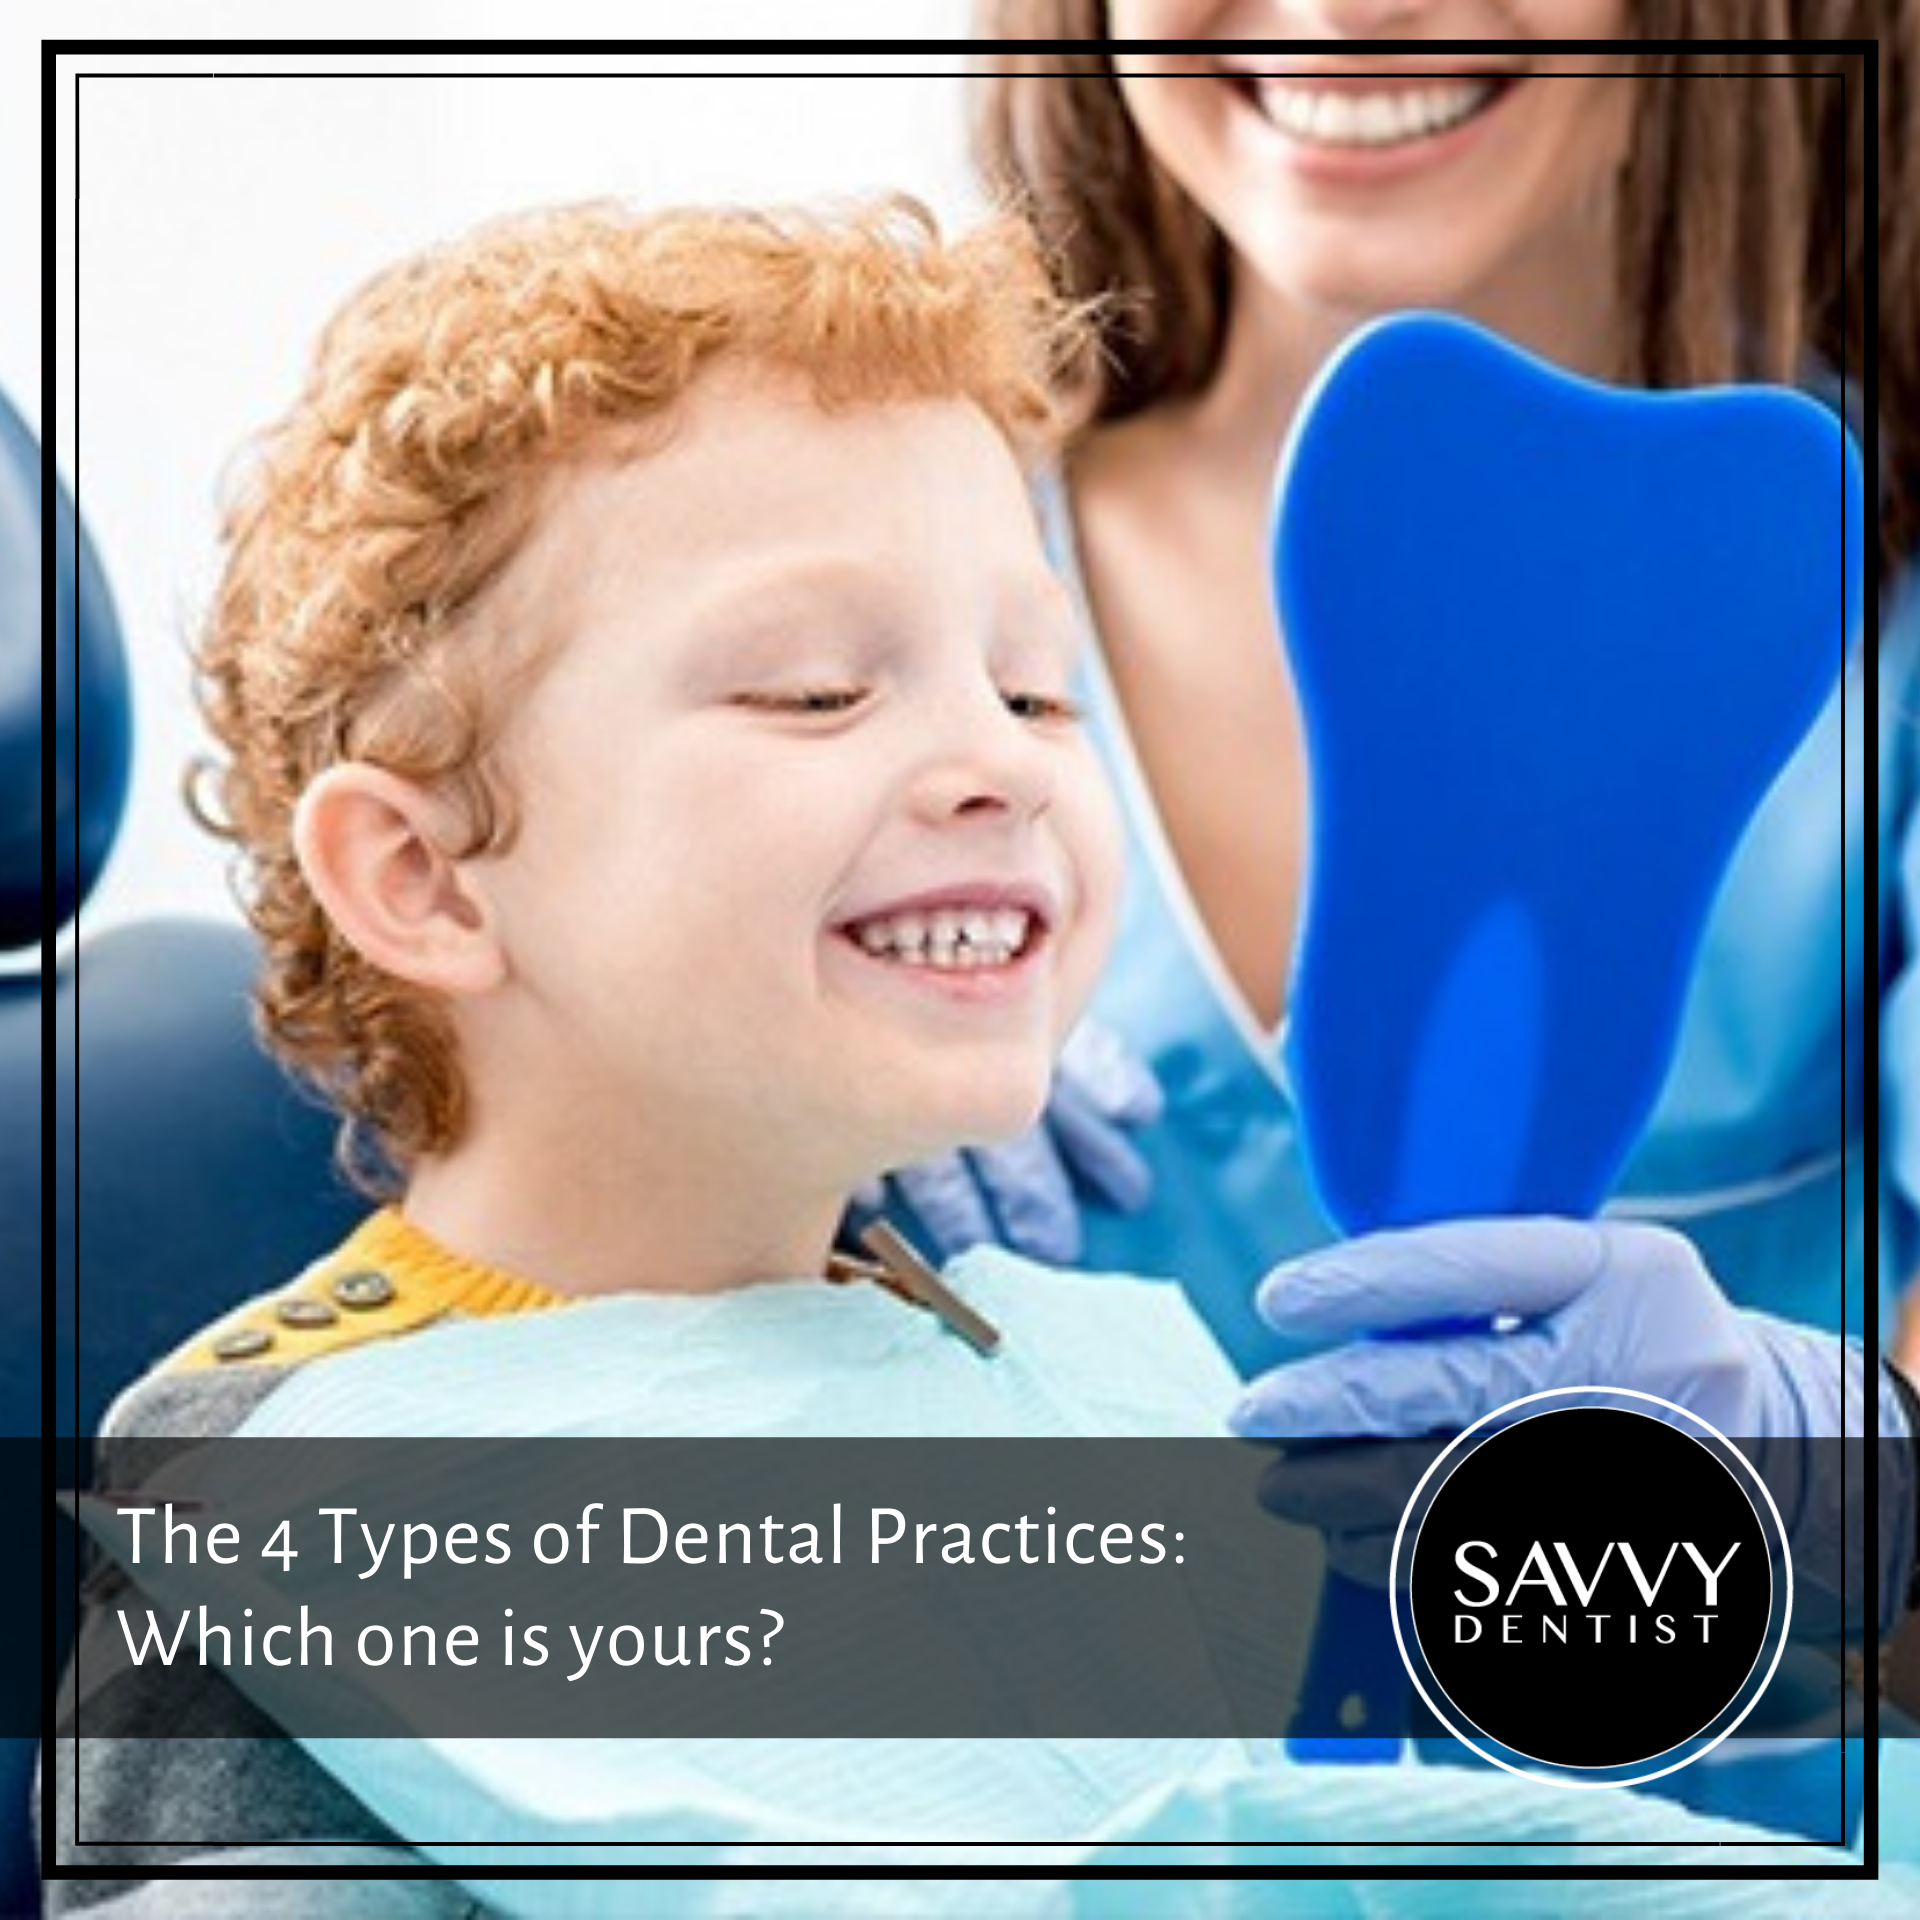 The 4 Types of Dental Practices: Which One is Yours?